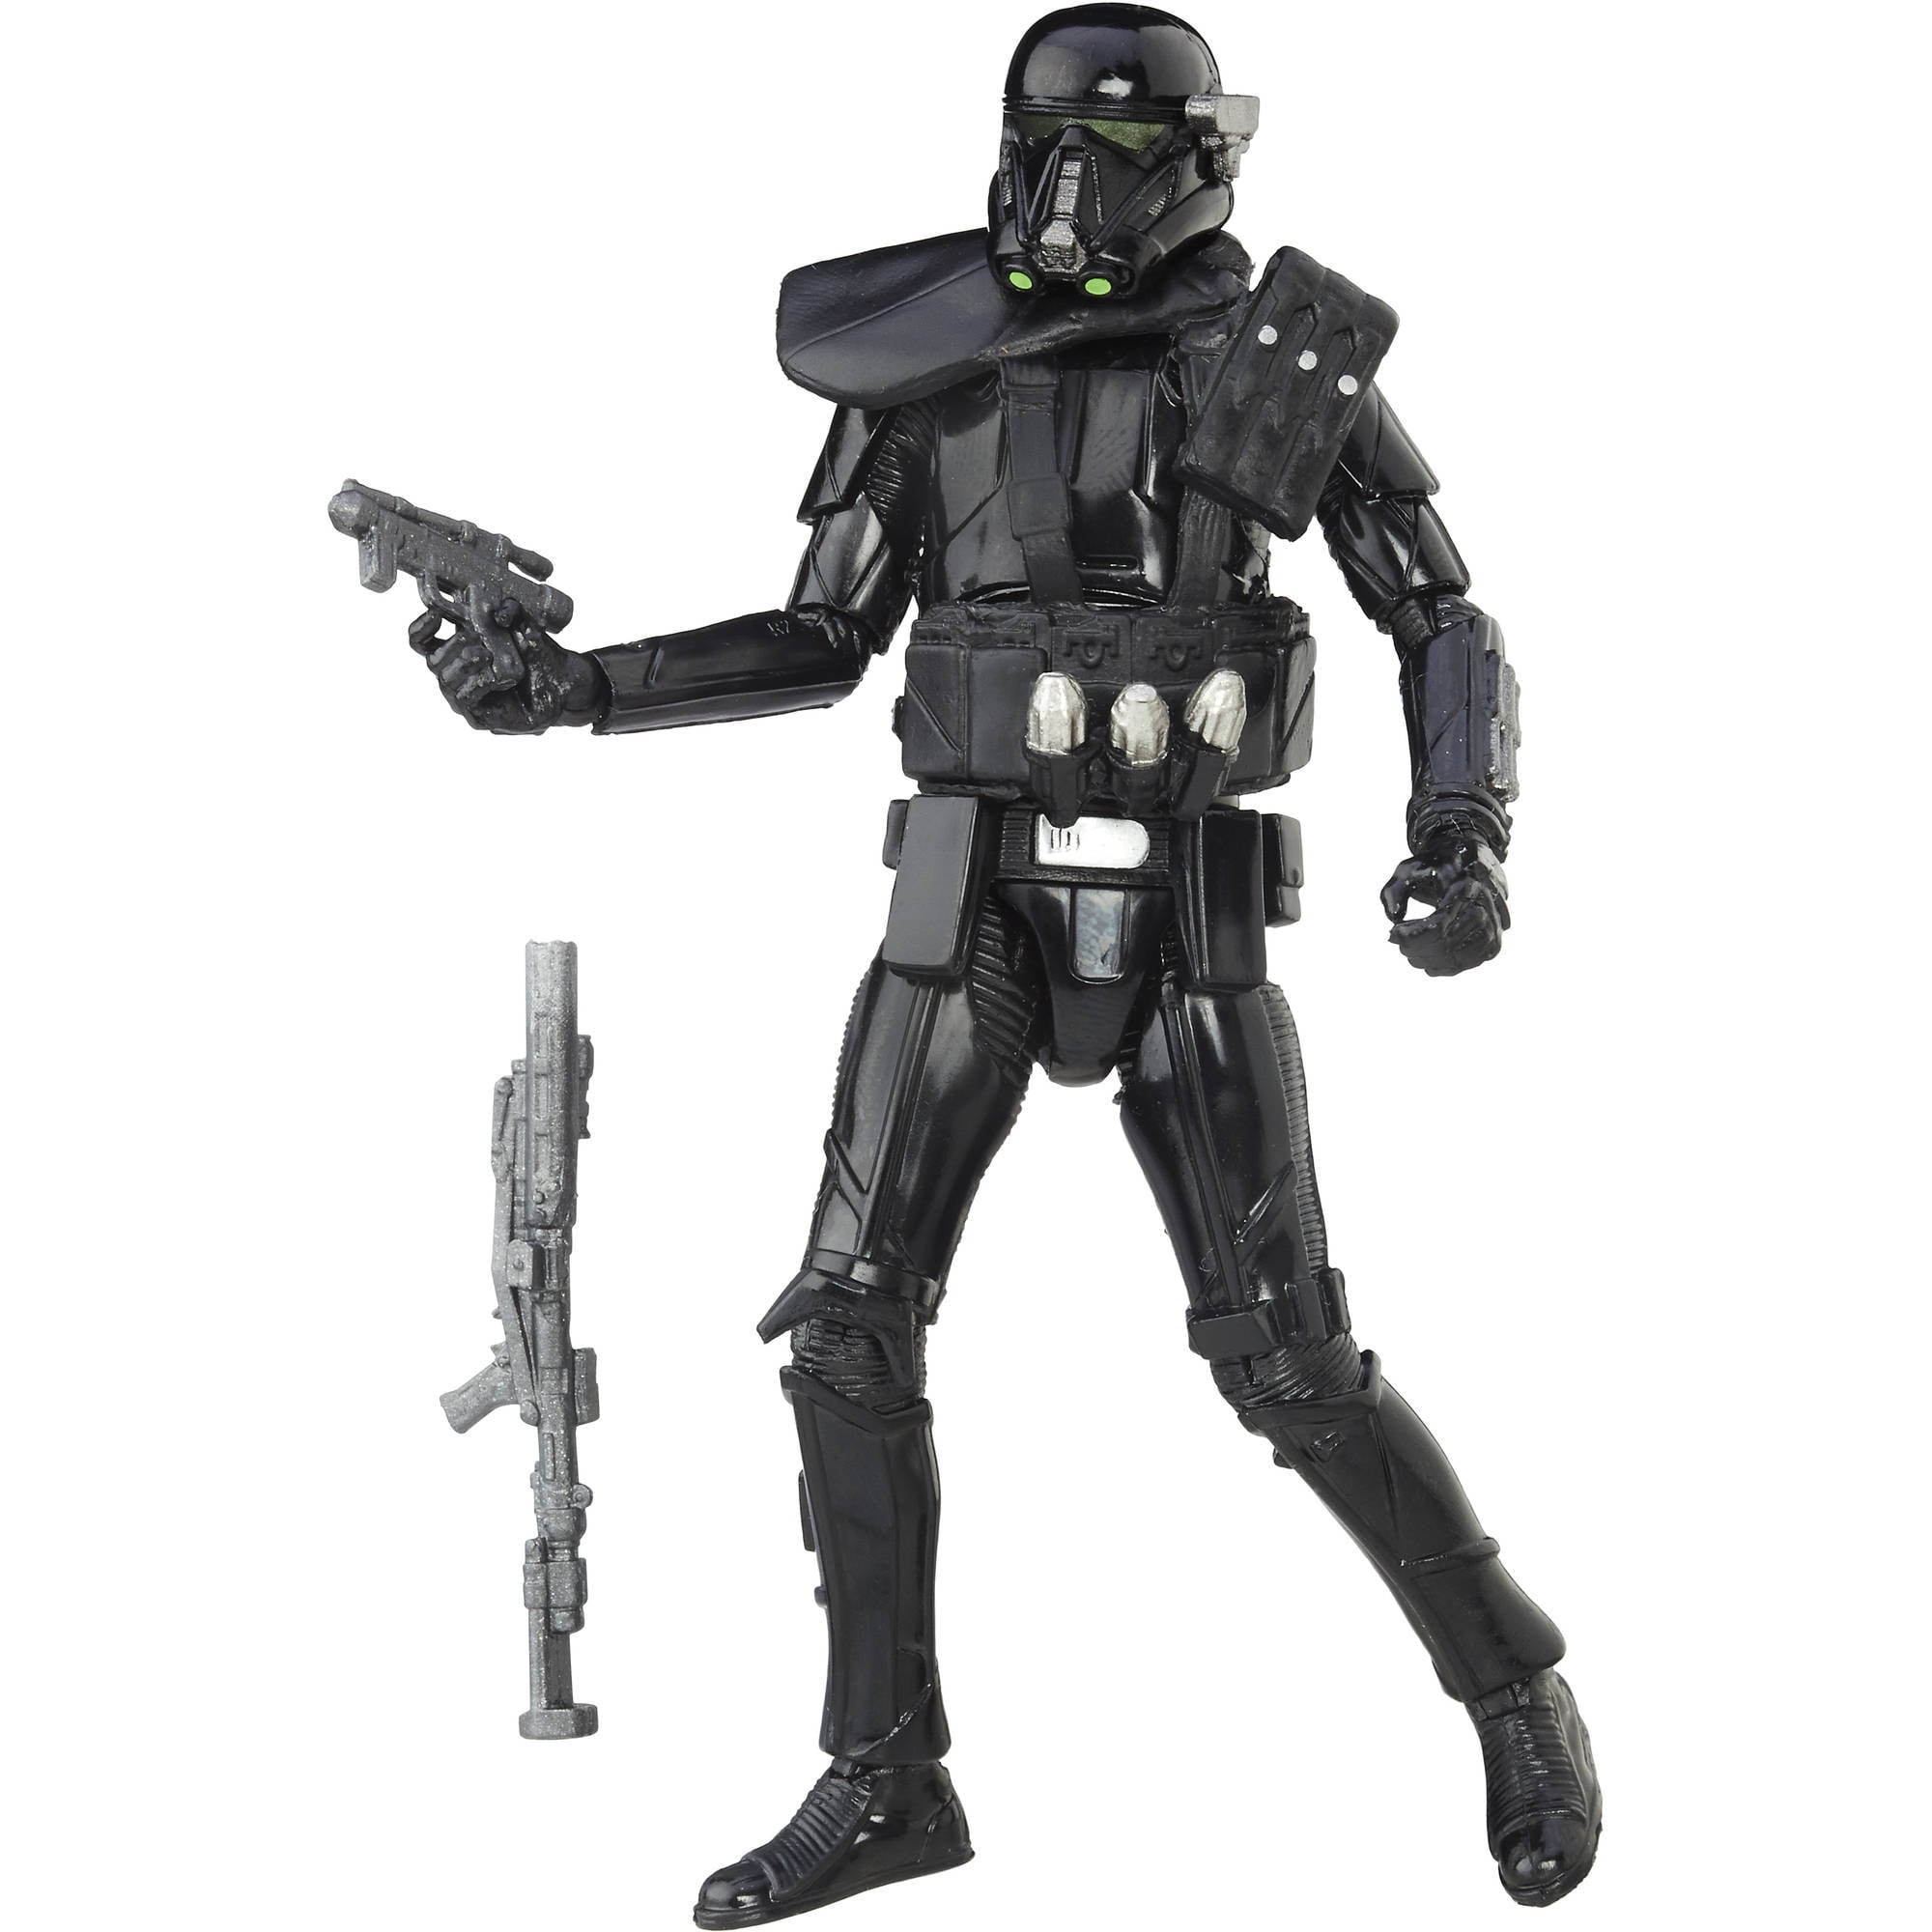 Star Wars Rouge One 12" Action Figure-Imperial Death Trooper, 